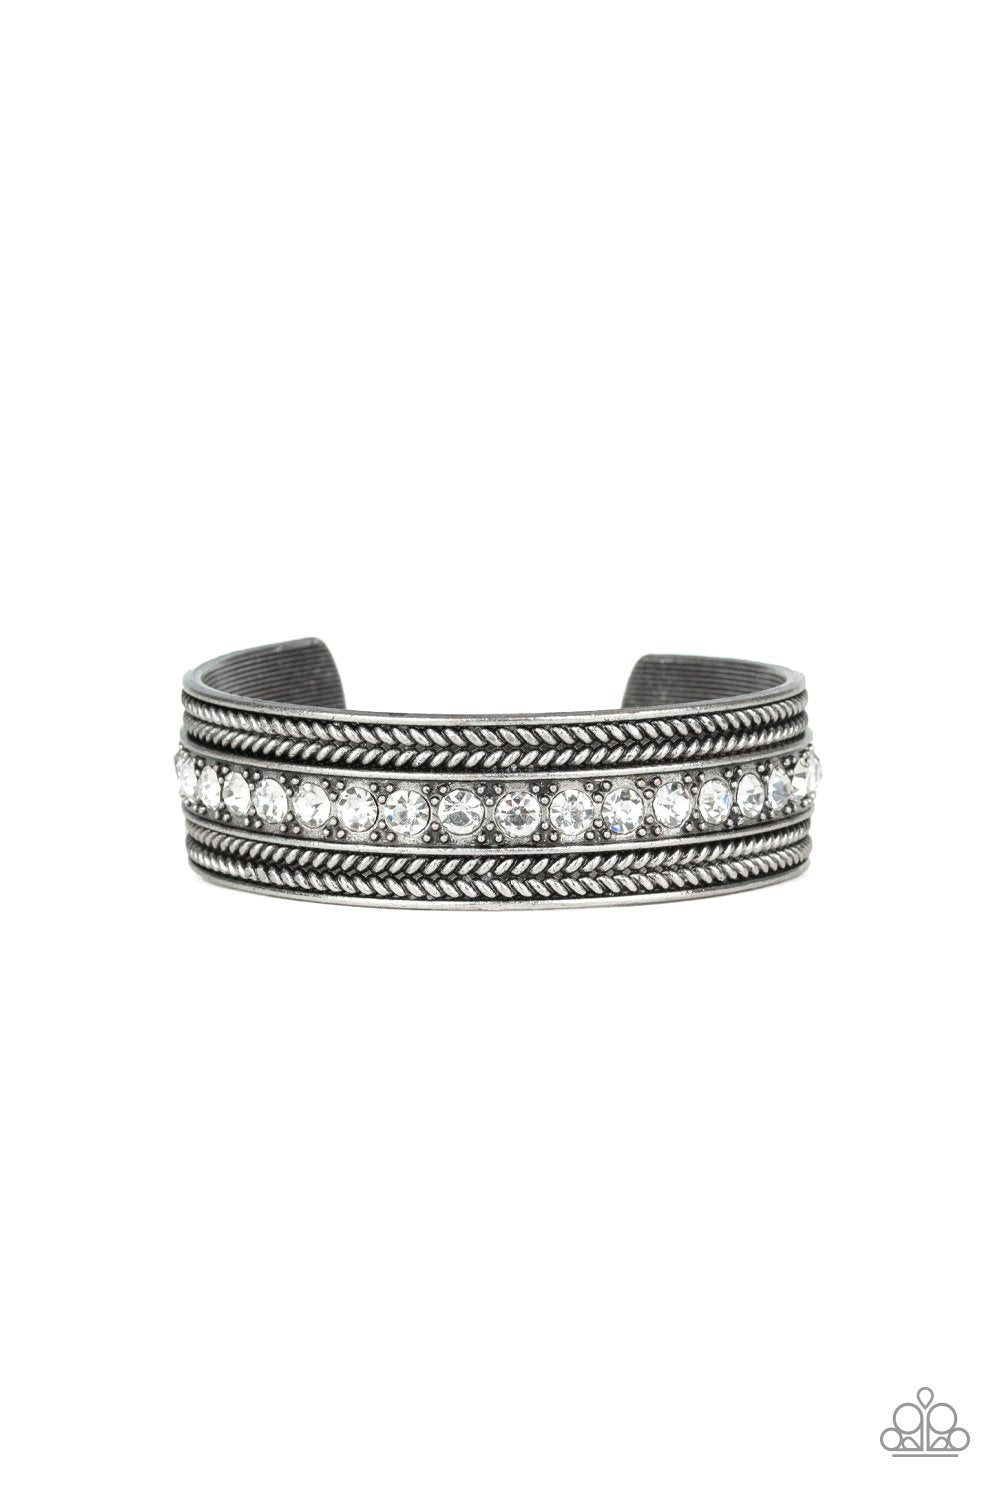 Empress Etiquette - White and Silver Cuff Bracelet - Paparazzi Accessories - A row of glittery white rhinestones line the center of a studded silver cuff for an edgy look. Sold as one individual bracelet.